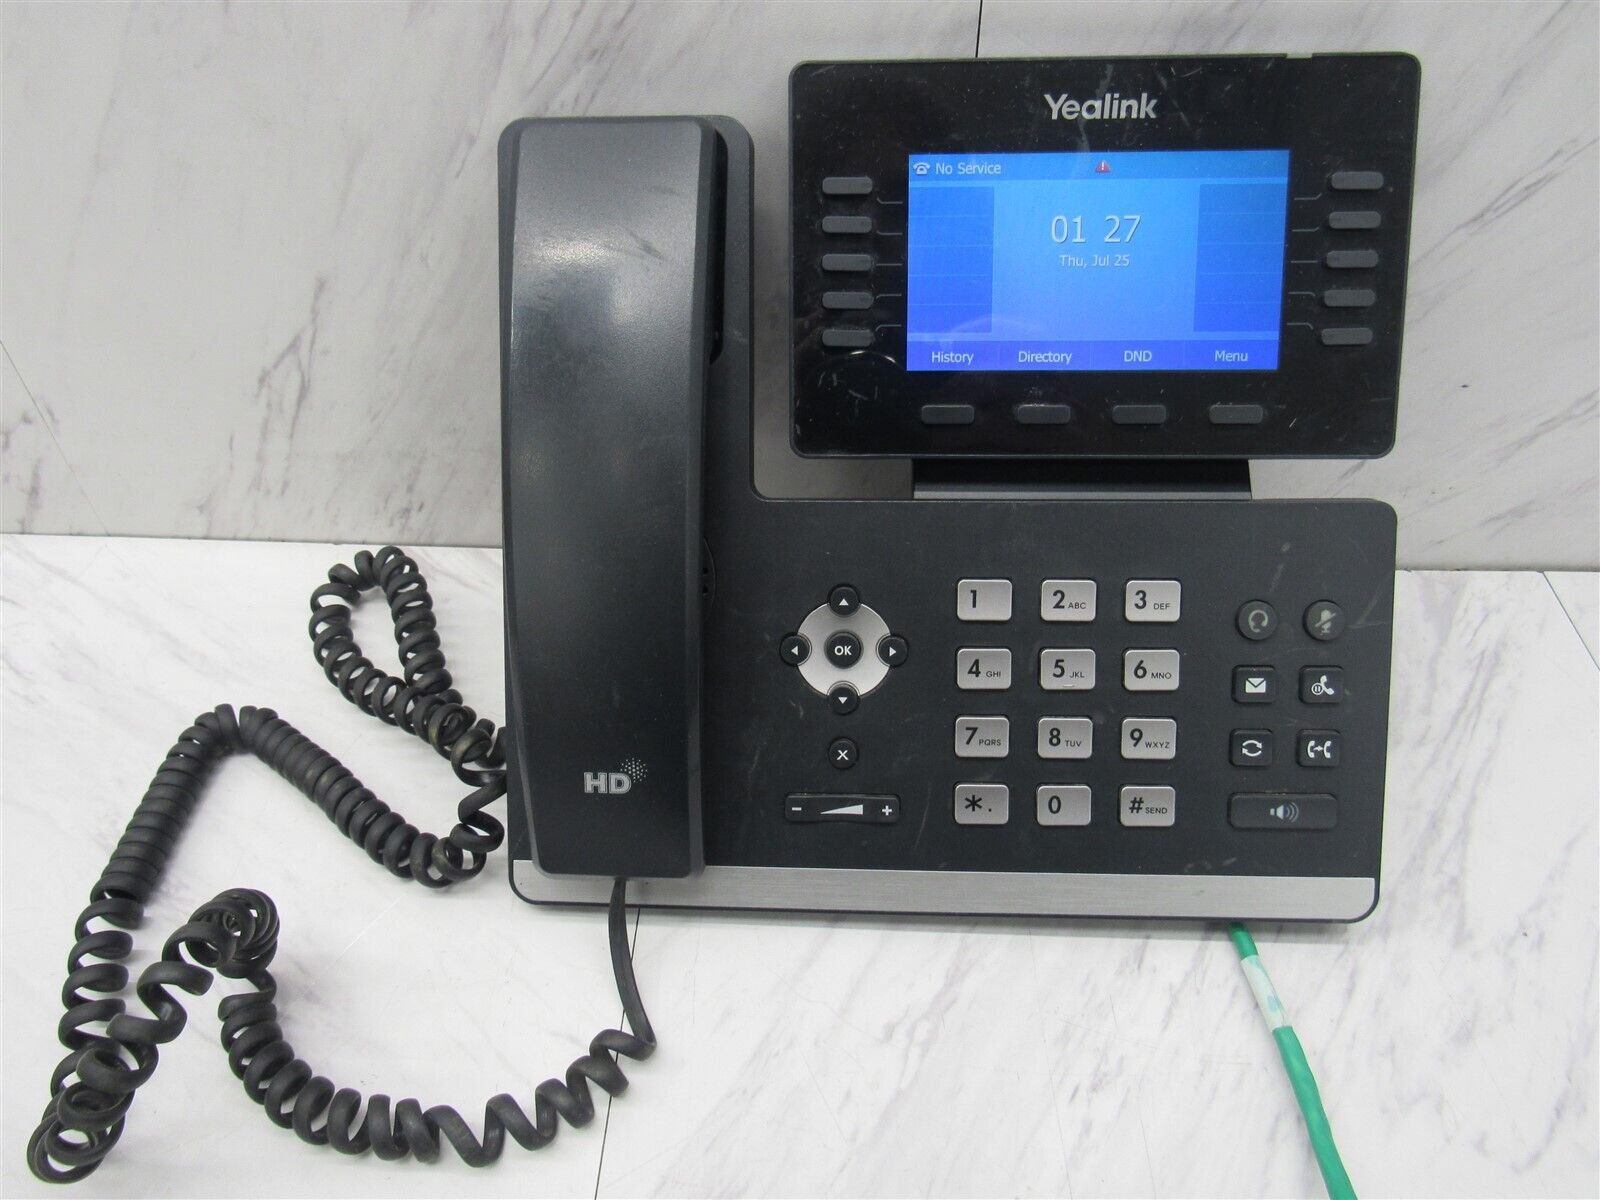 Yealink SIP-T54W W/ HD Display Business VoIP Phone Built-in Bluetooth and POE 